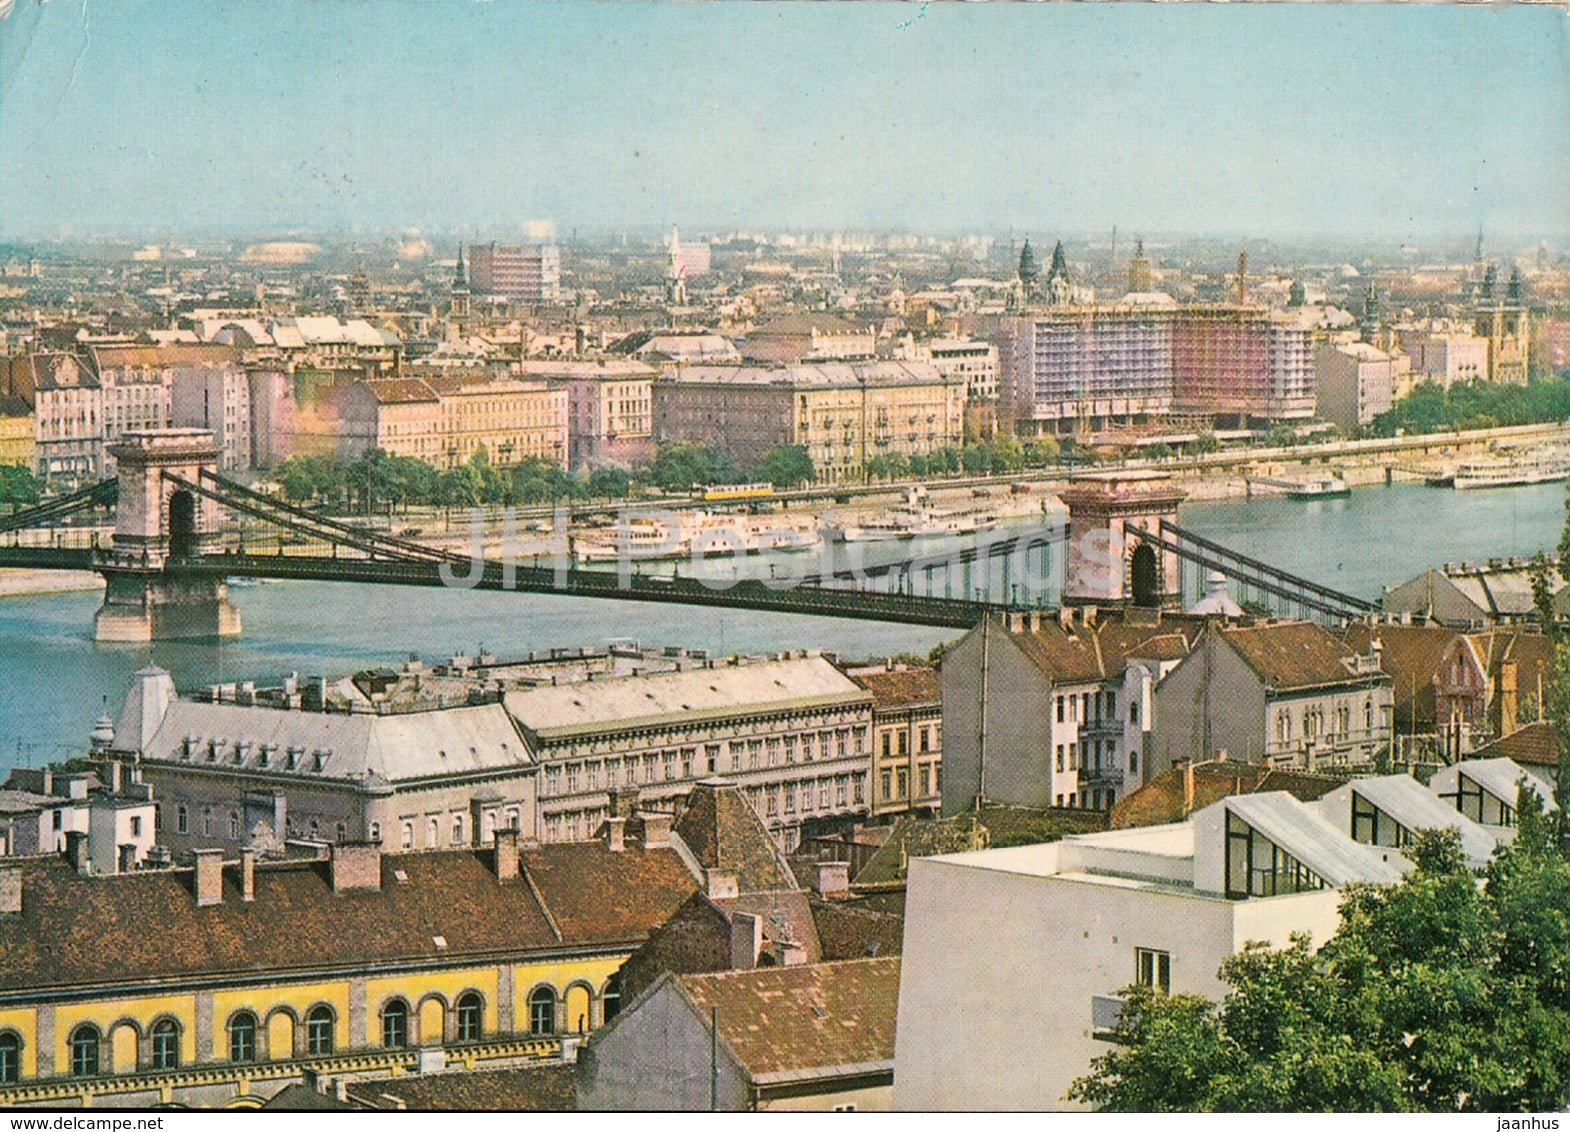 Budapest - View with the Chain Bridge - 1970 - Hungary - used - JH Postcards